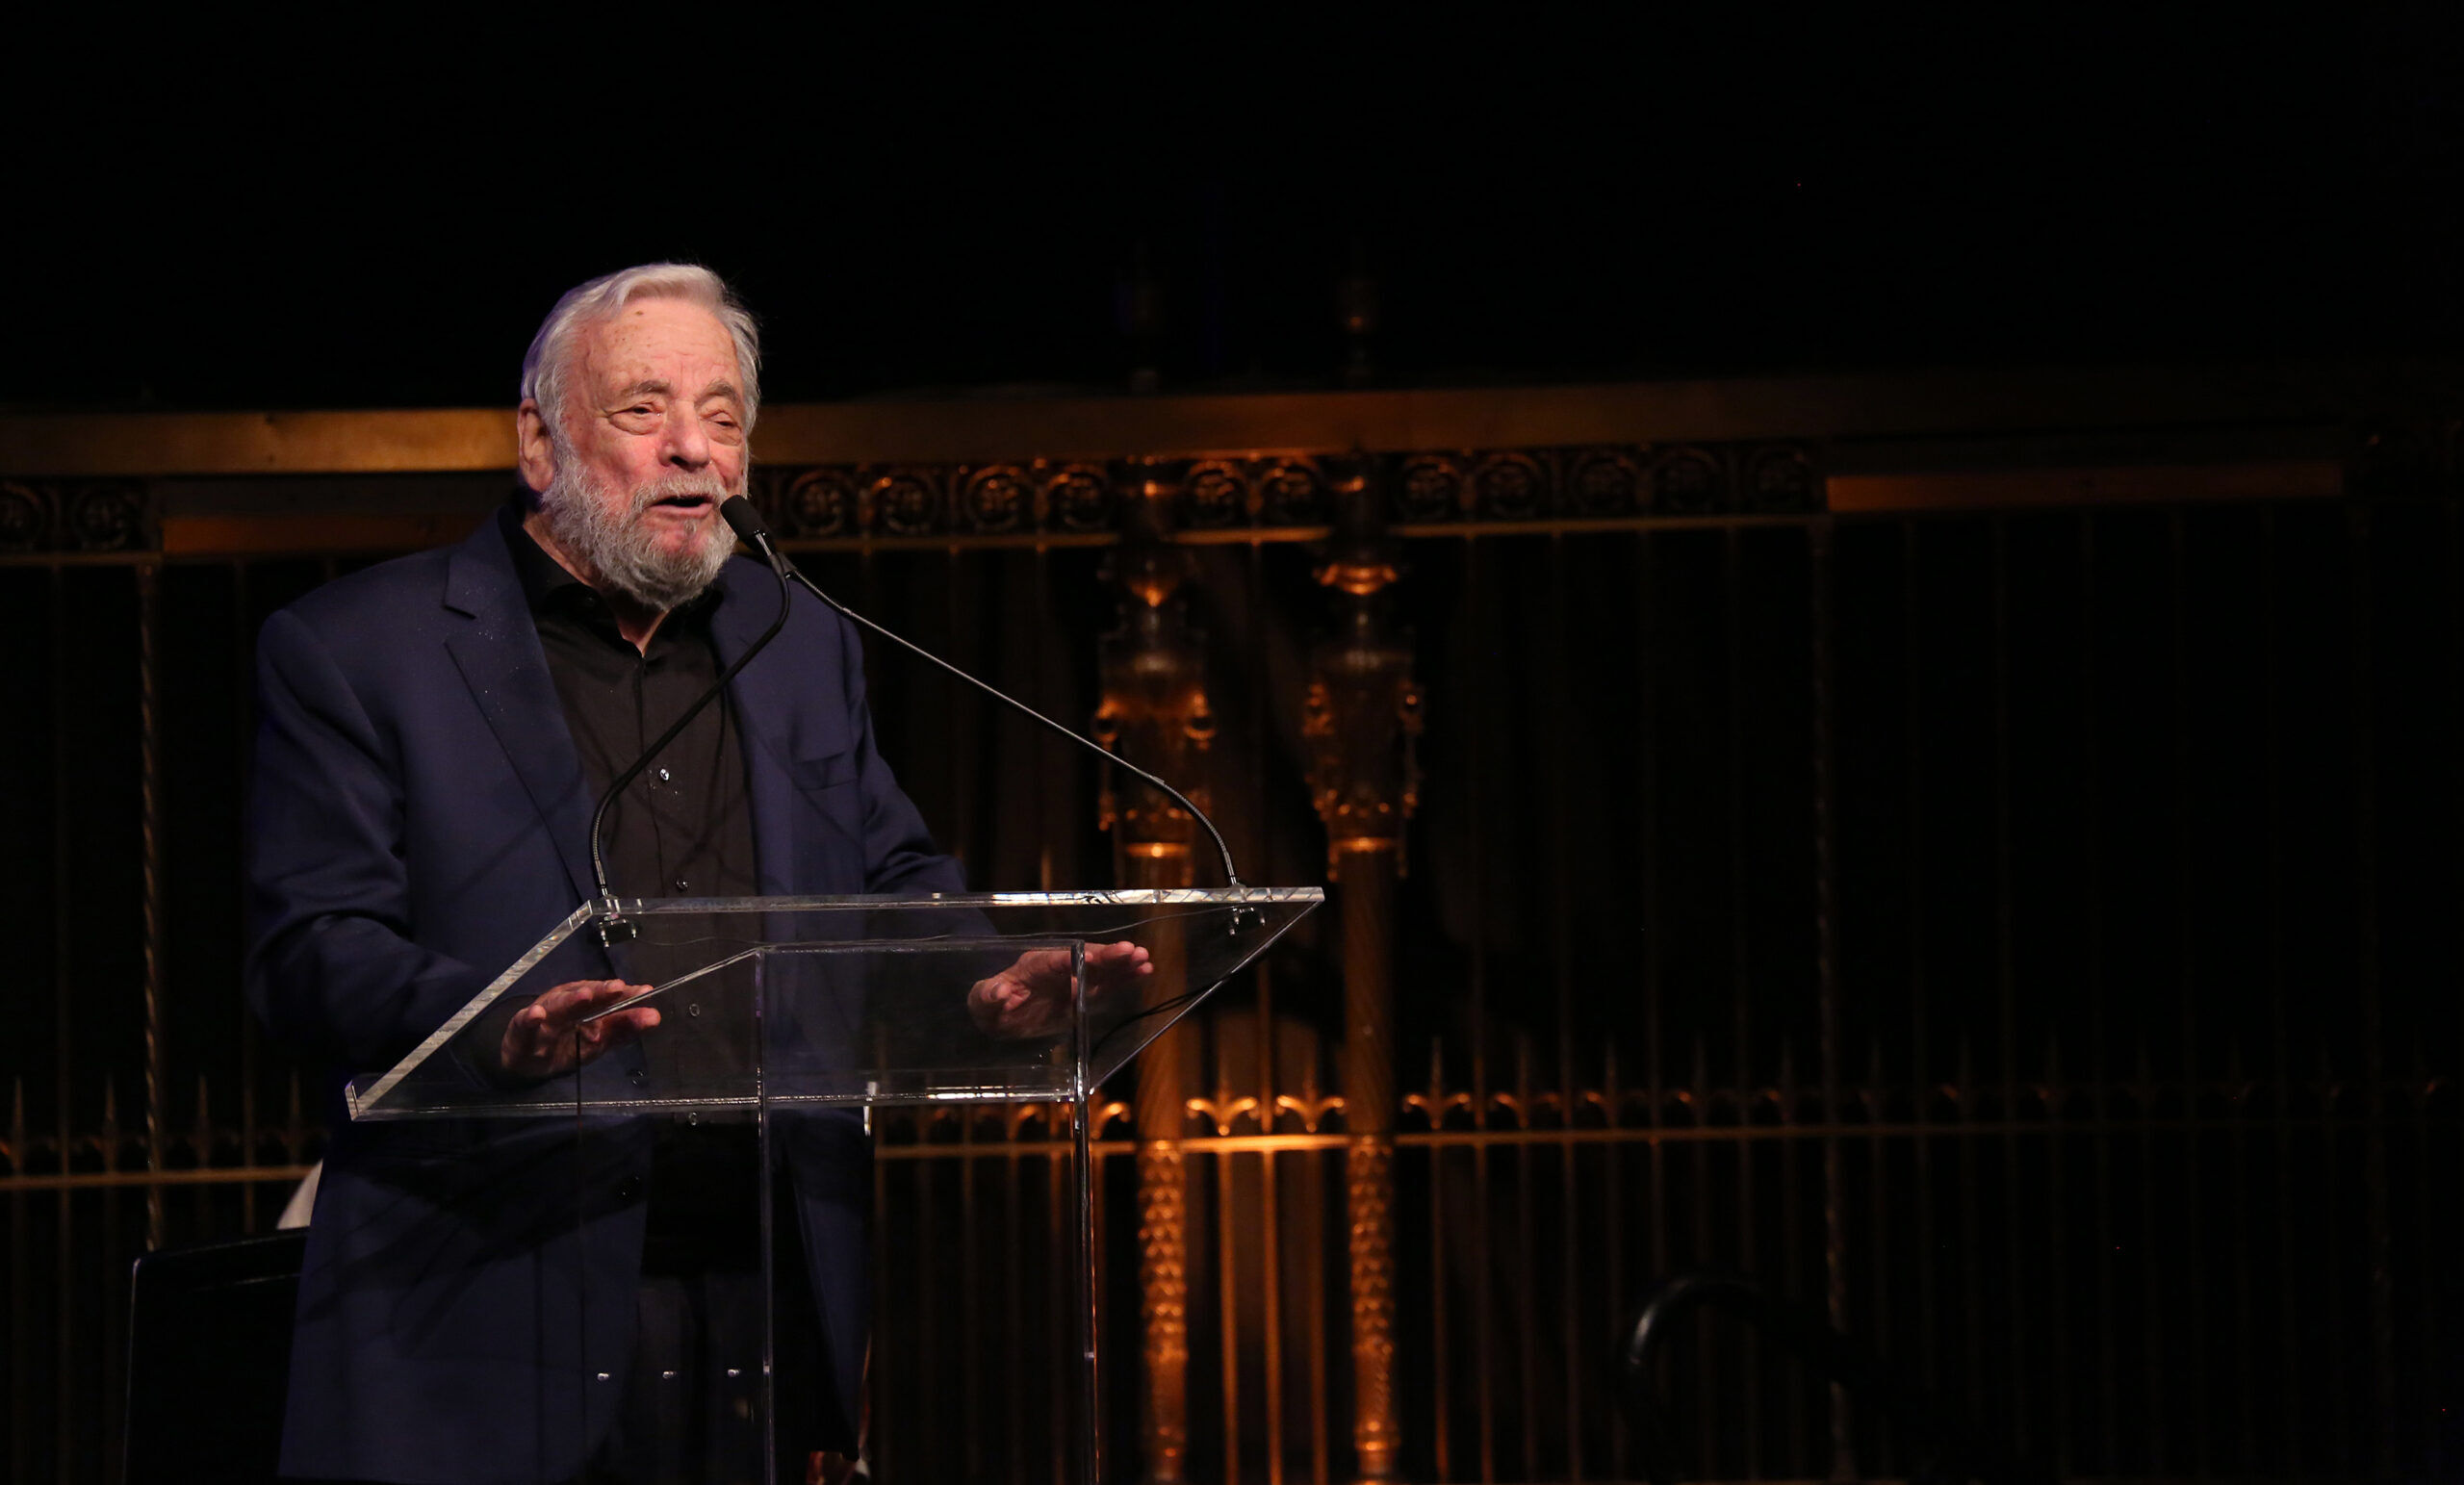 NEW YORK, NY - NOVEMBER 07: Stephen Sondheim during the Dramatists Guild Fund Gala 'Great Writers Thank Their Lucky Stars : The Presidential Edition' presentation at Gotham Hall on November 7, 2016 in New York City. (Photo by Walter McBride/Getty Images)